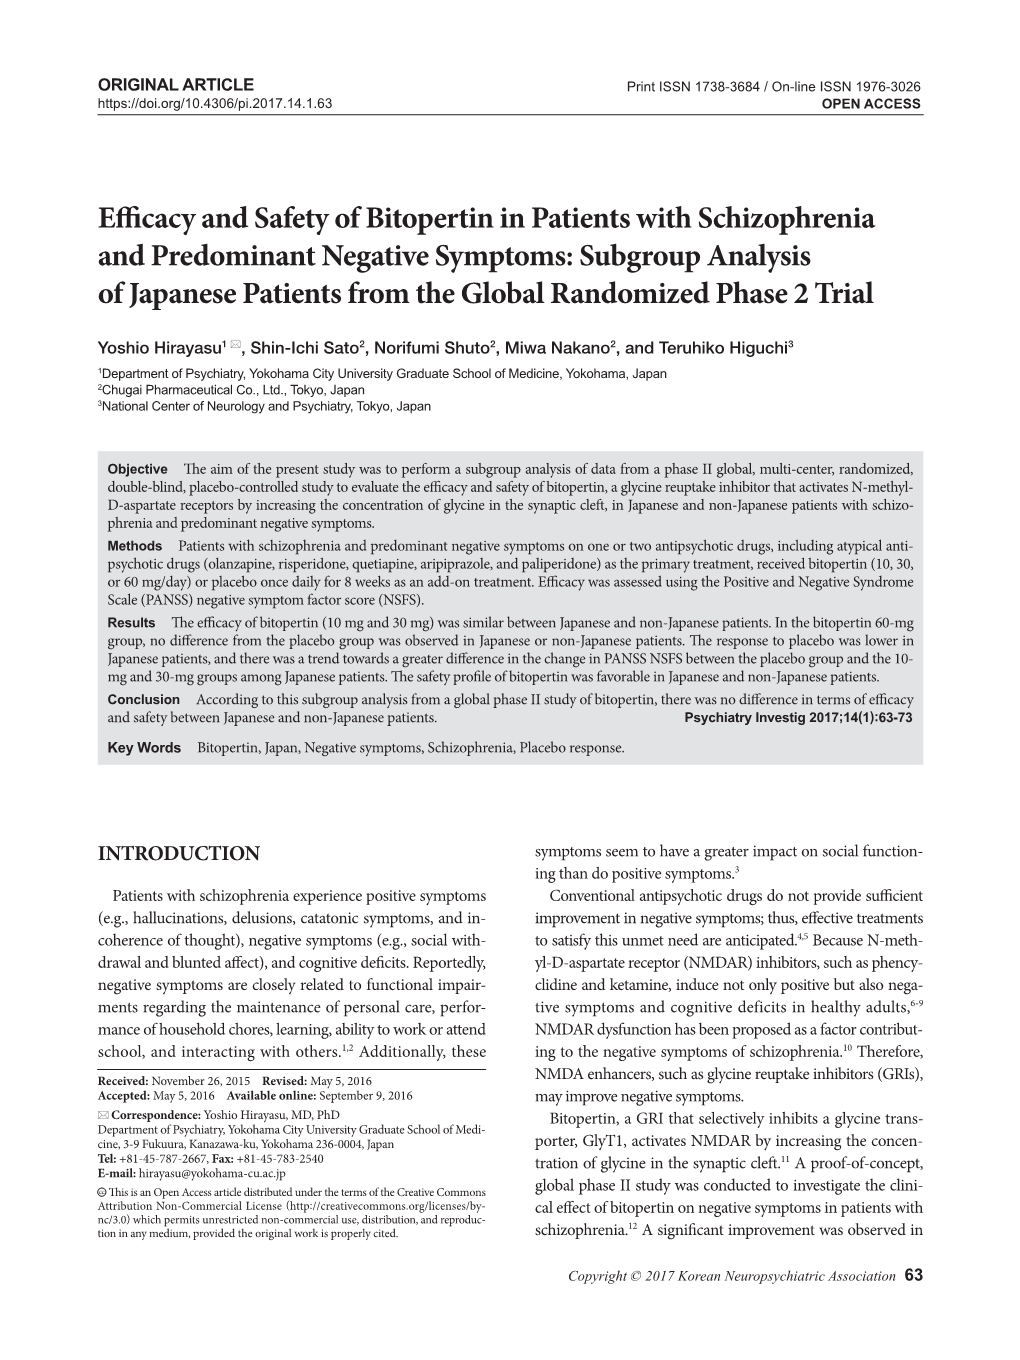 Efficacy and Safety of Bitopertin in Patients with Schizophrenia And